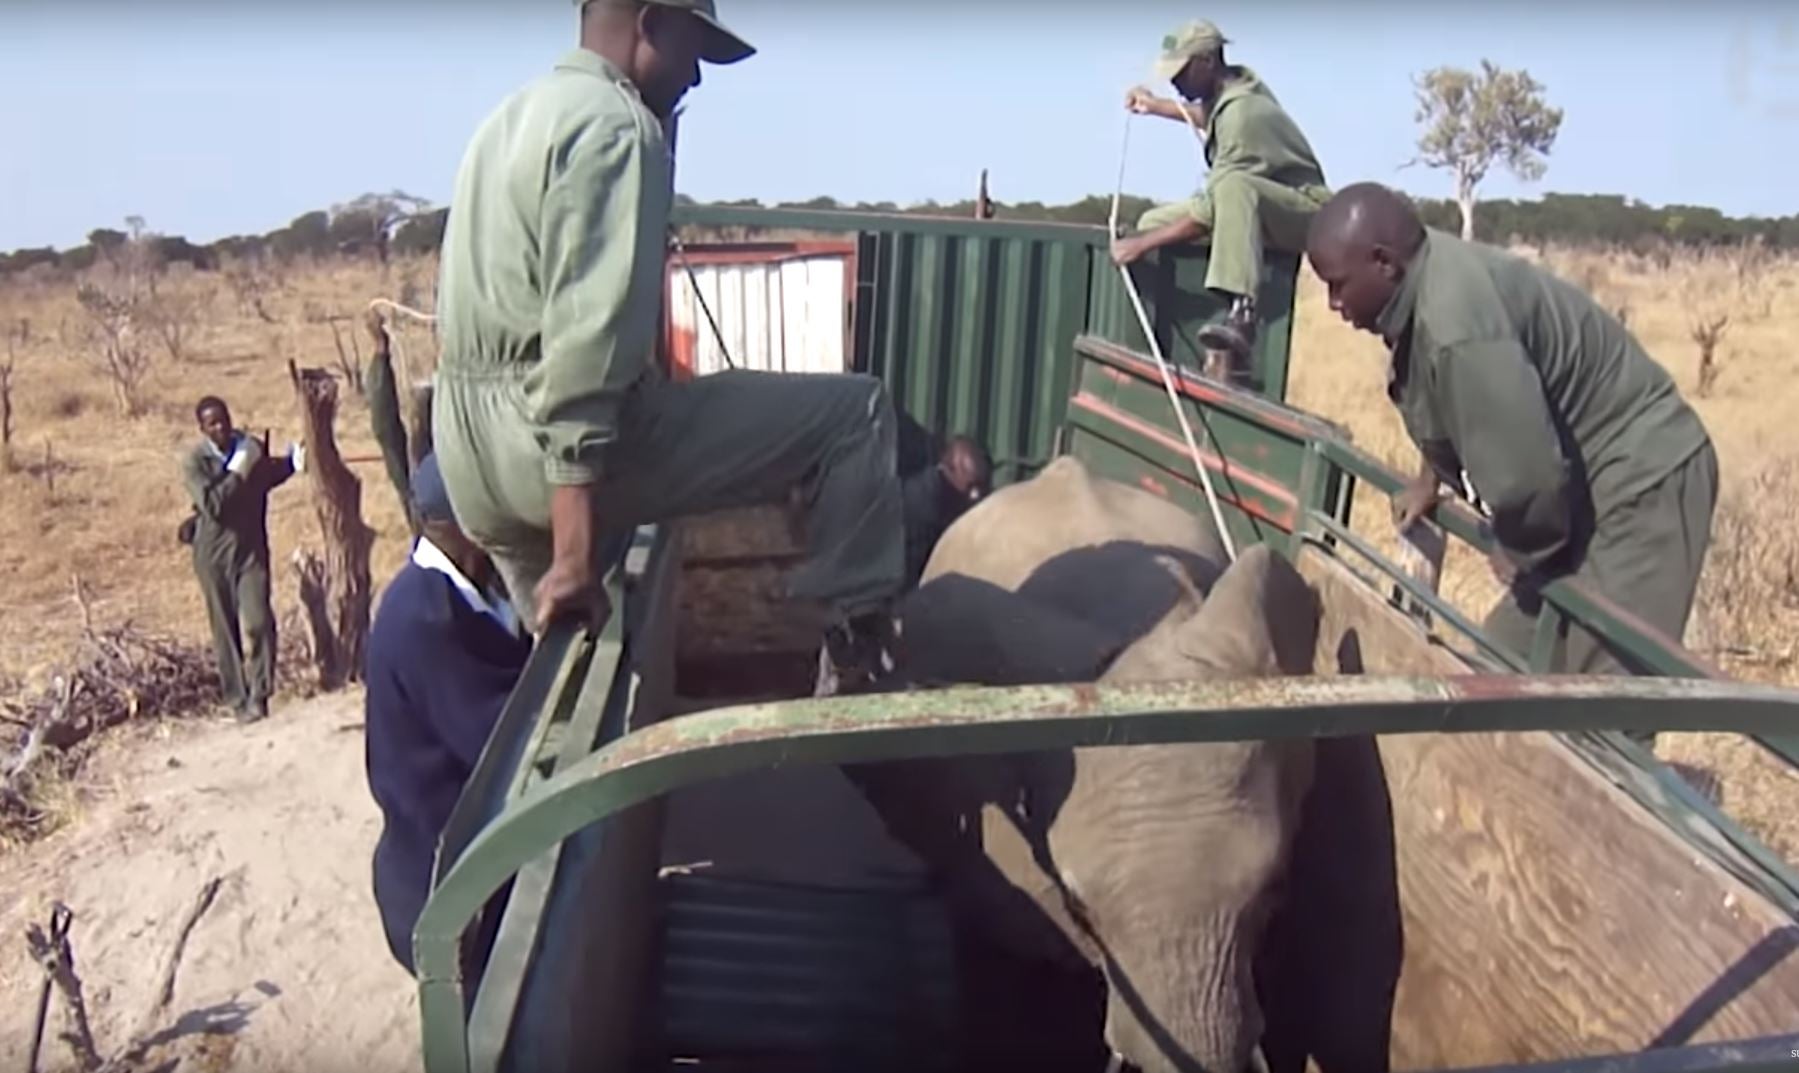 The video shows the legal, yet secretive operation where five elephants were caught in Hwange national park